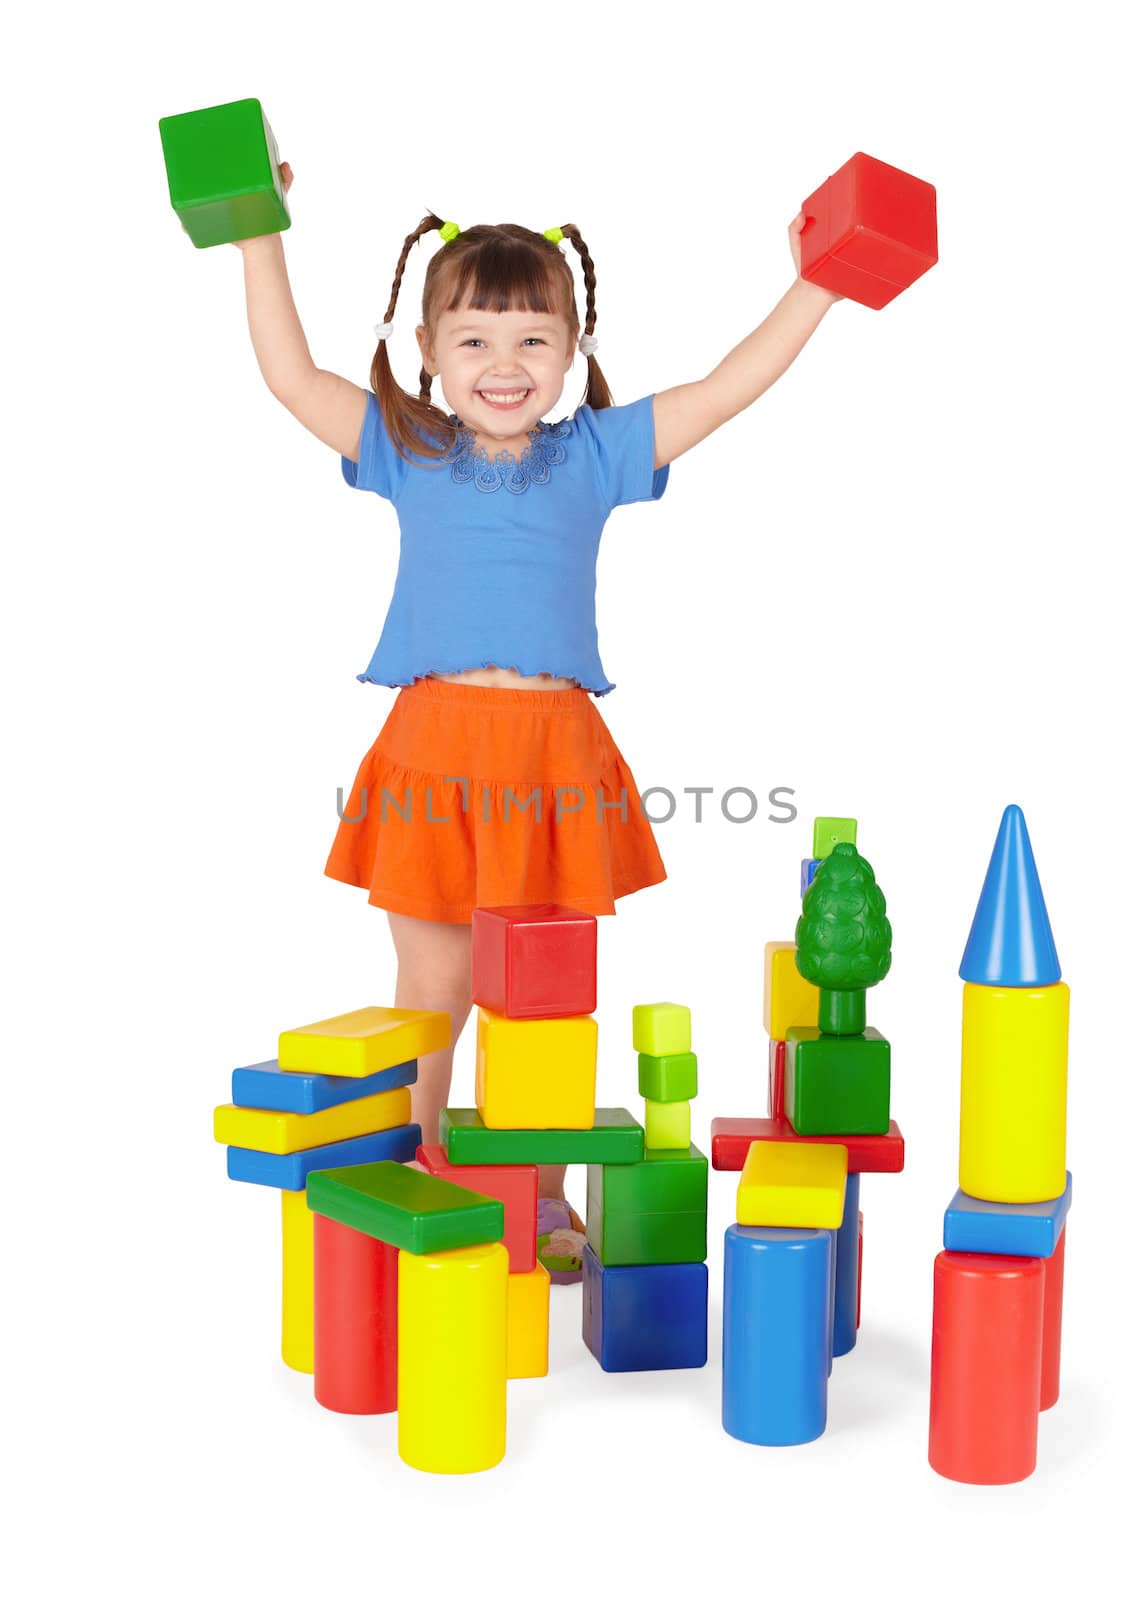 Joyful child plays in the builder isolated on a white background